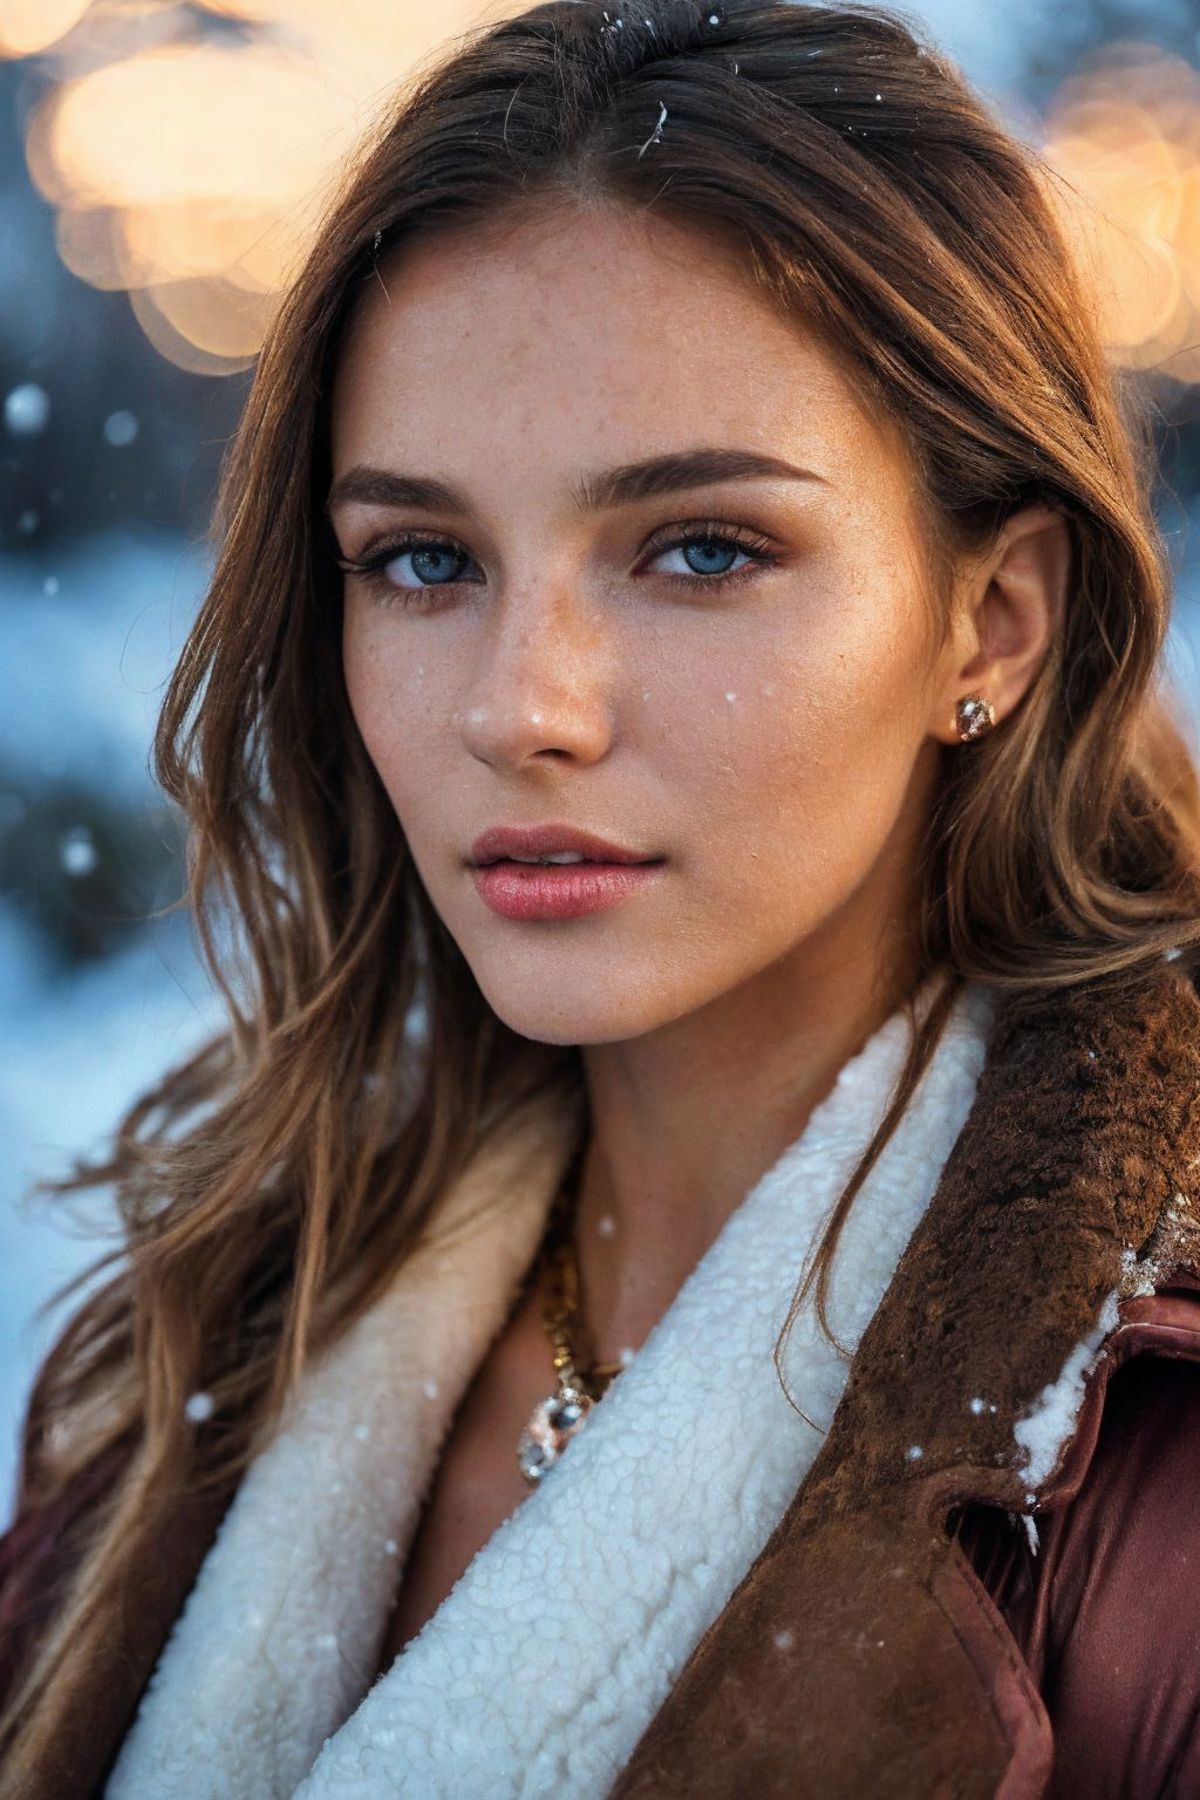 A young woman with blue eyes wearing a brown coat, gold necklace, and earrings.